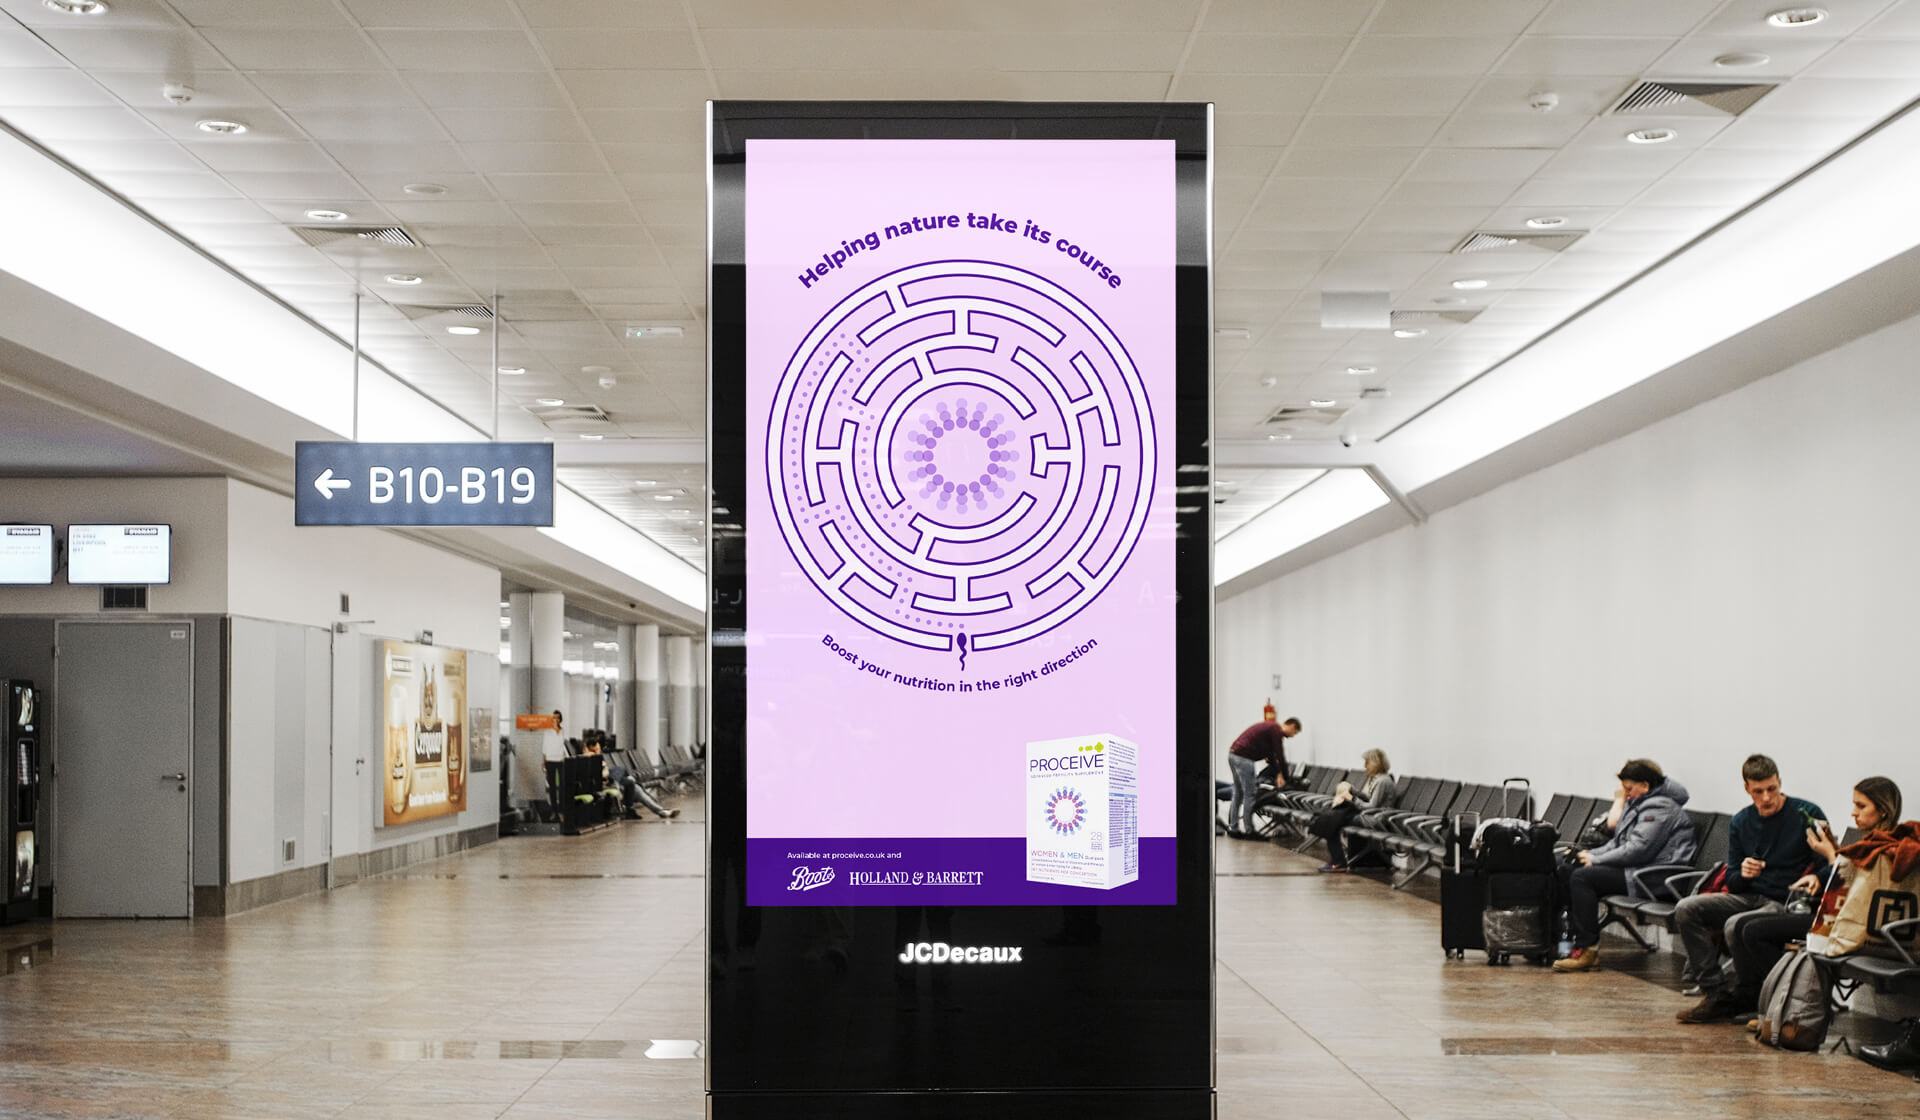 Proceive - Giving Nature A Helping Hand - Mellor&Smith Advertising campaign at travel interchange